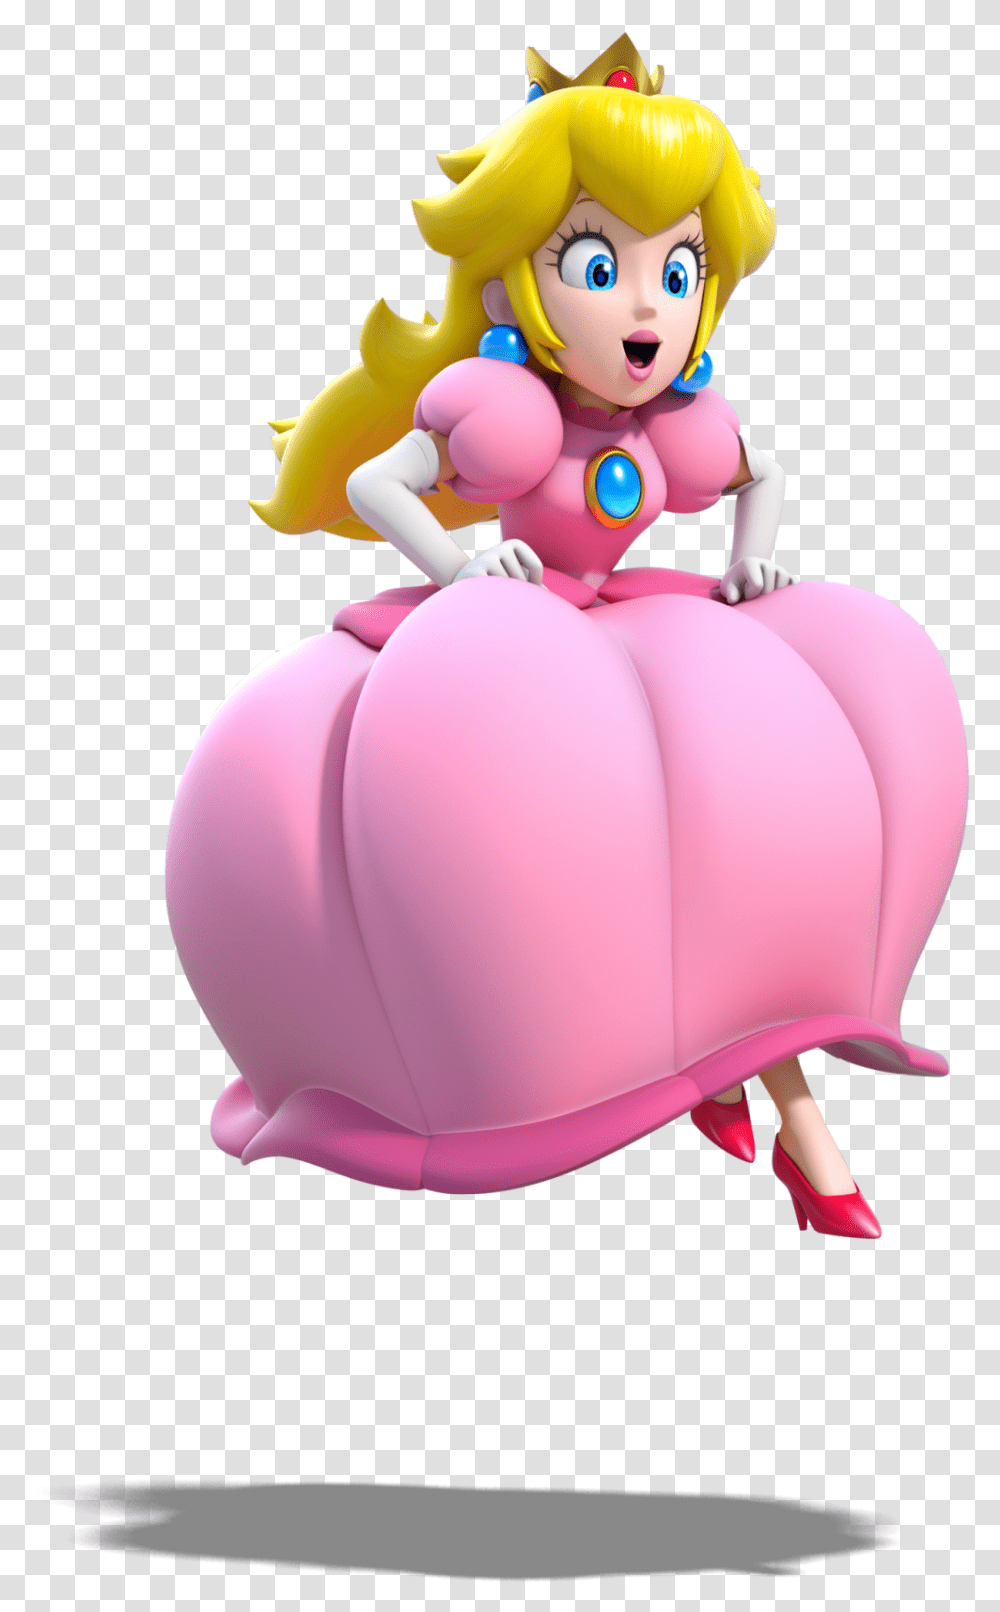 Peach Mario 3d World, Figurine, Inflatable, Cushion, Sweets Transparent Png